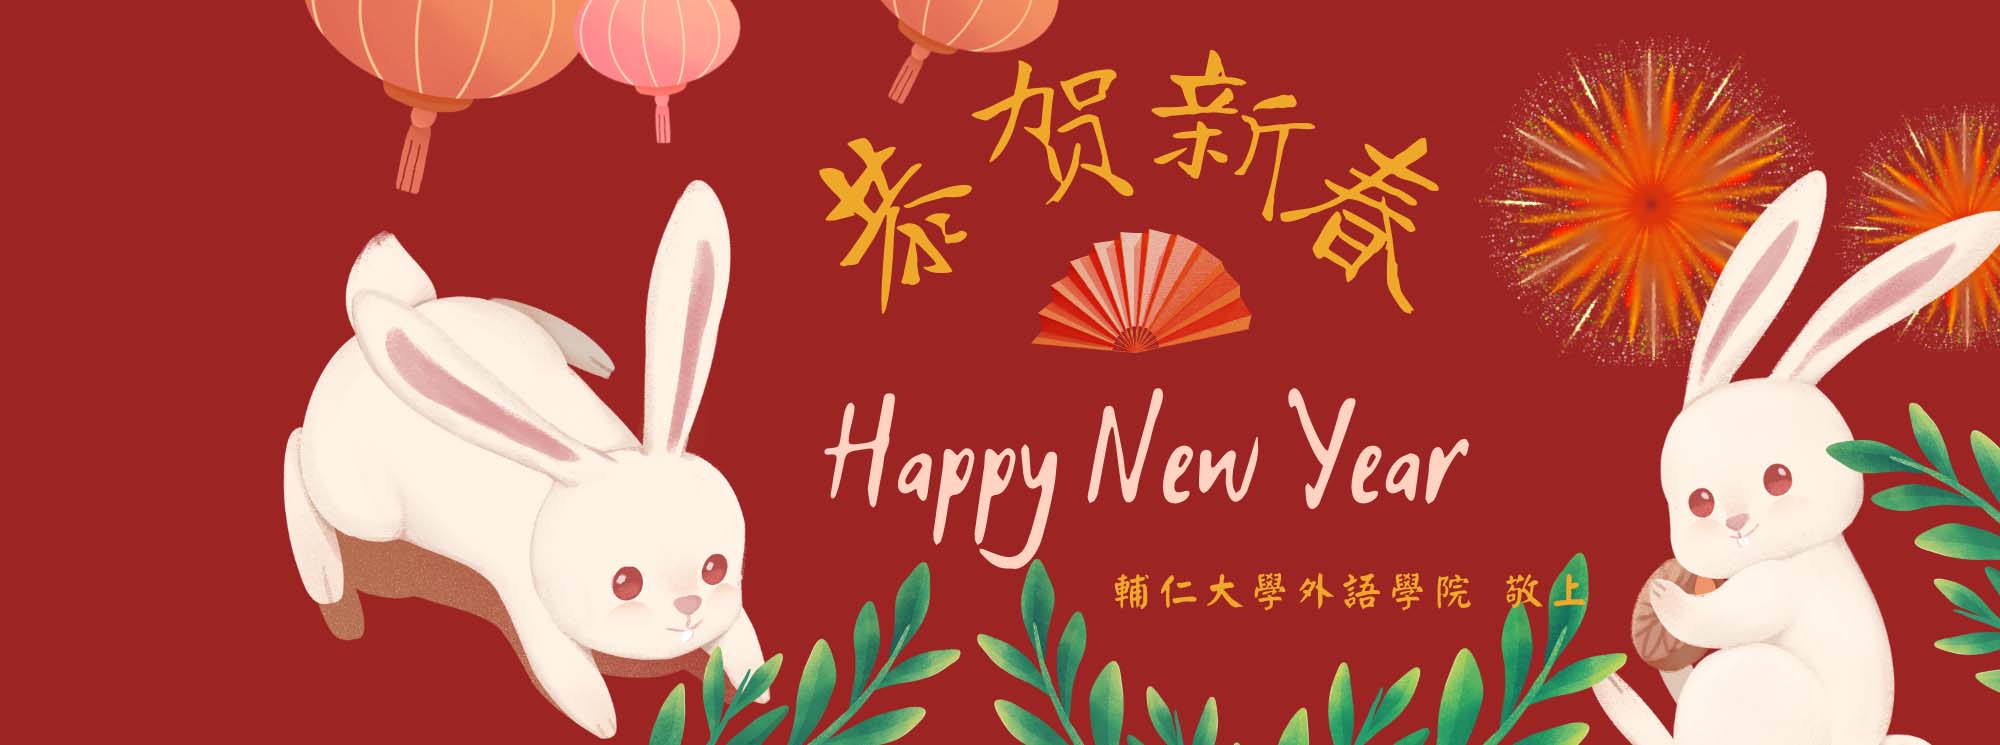 Rabbit jumps <br>and calls for a lucky and happy New Year.